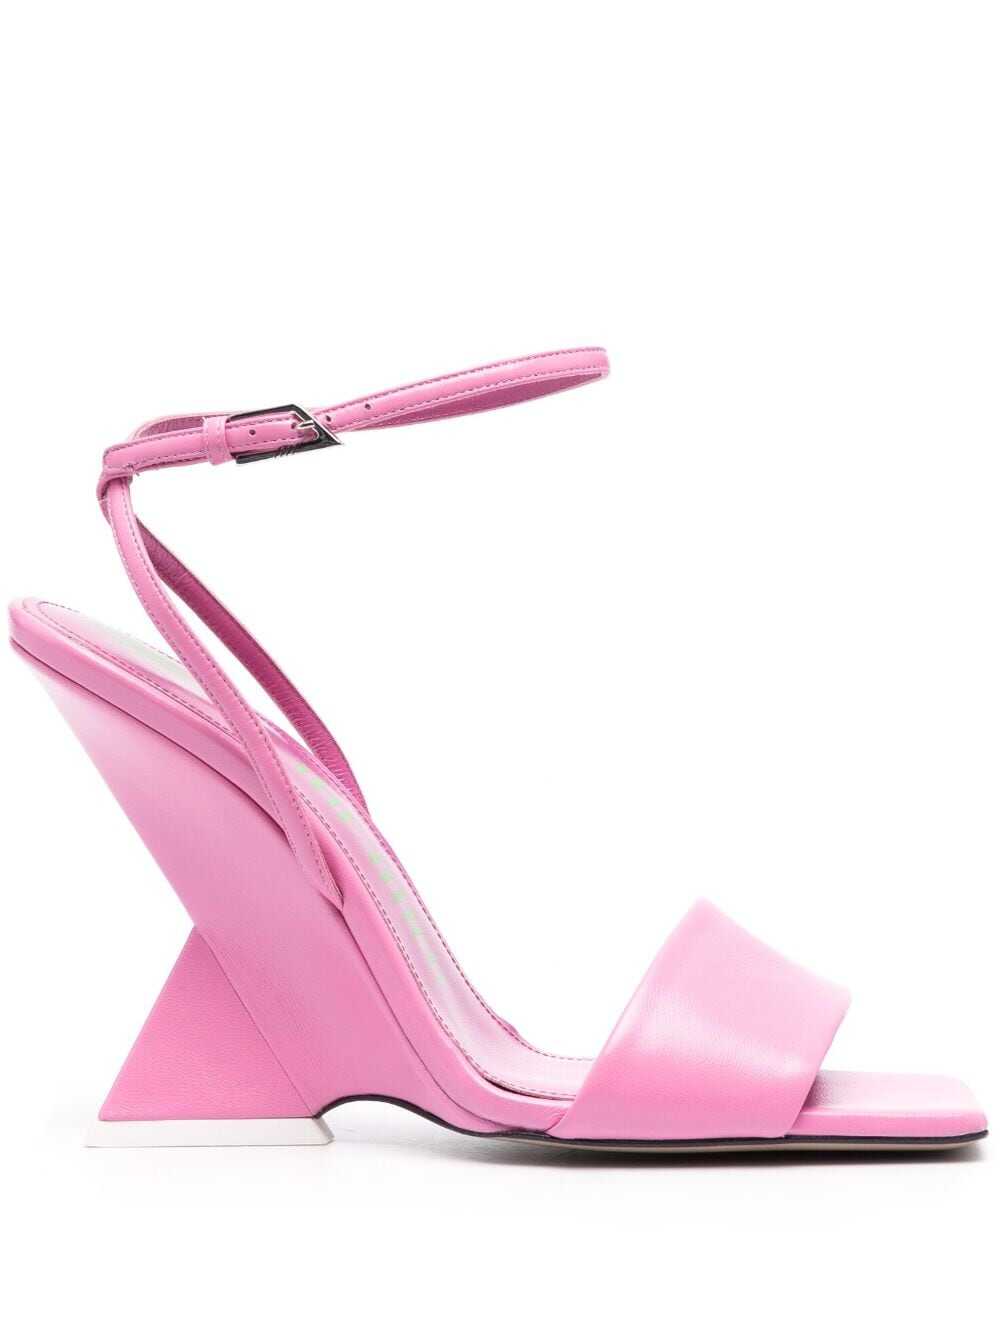 THE ATTICO Sandals Pink Pink image2